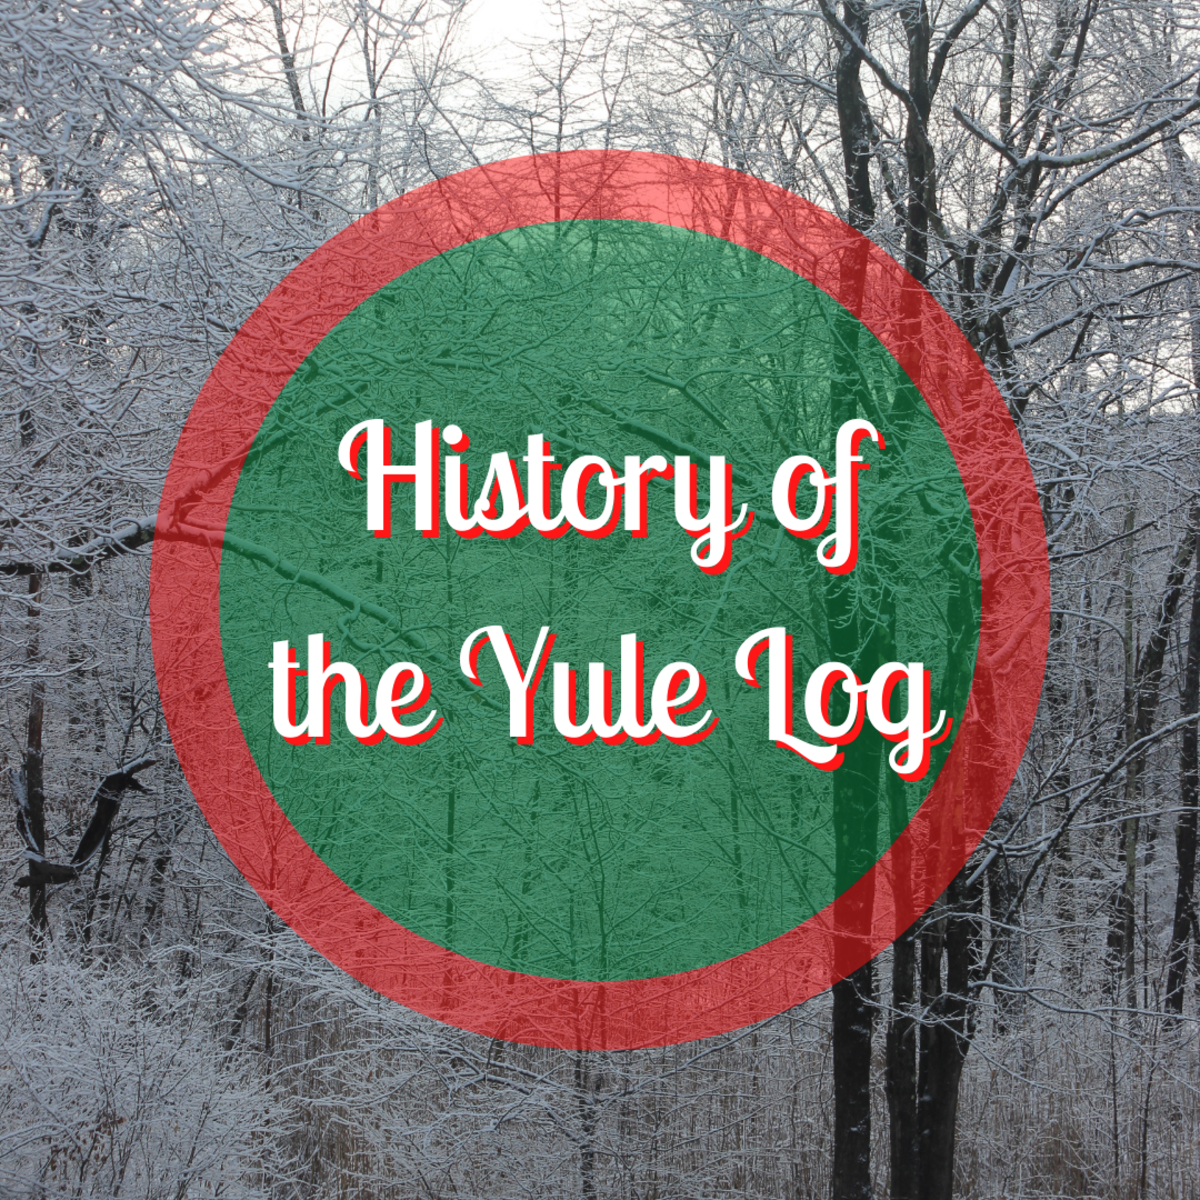 Let's learn about the Yule Log's origins and modern existence!